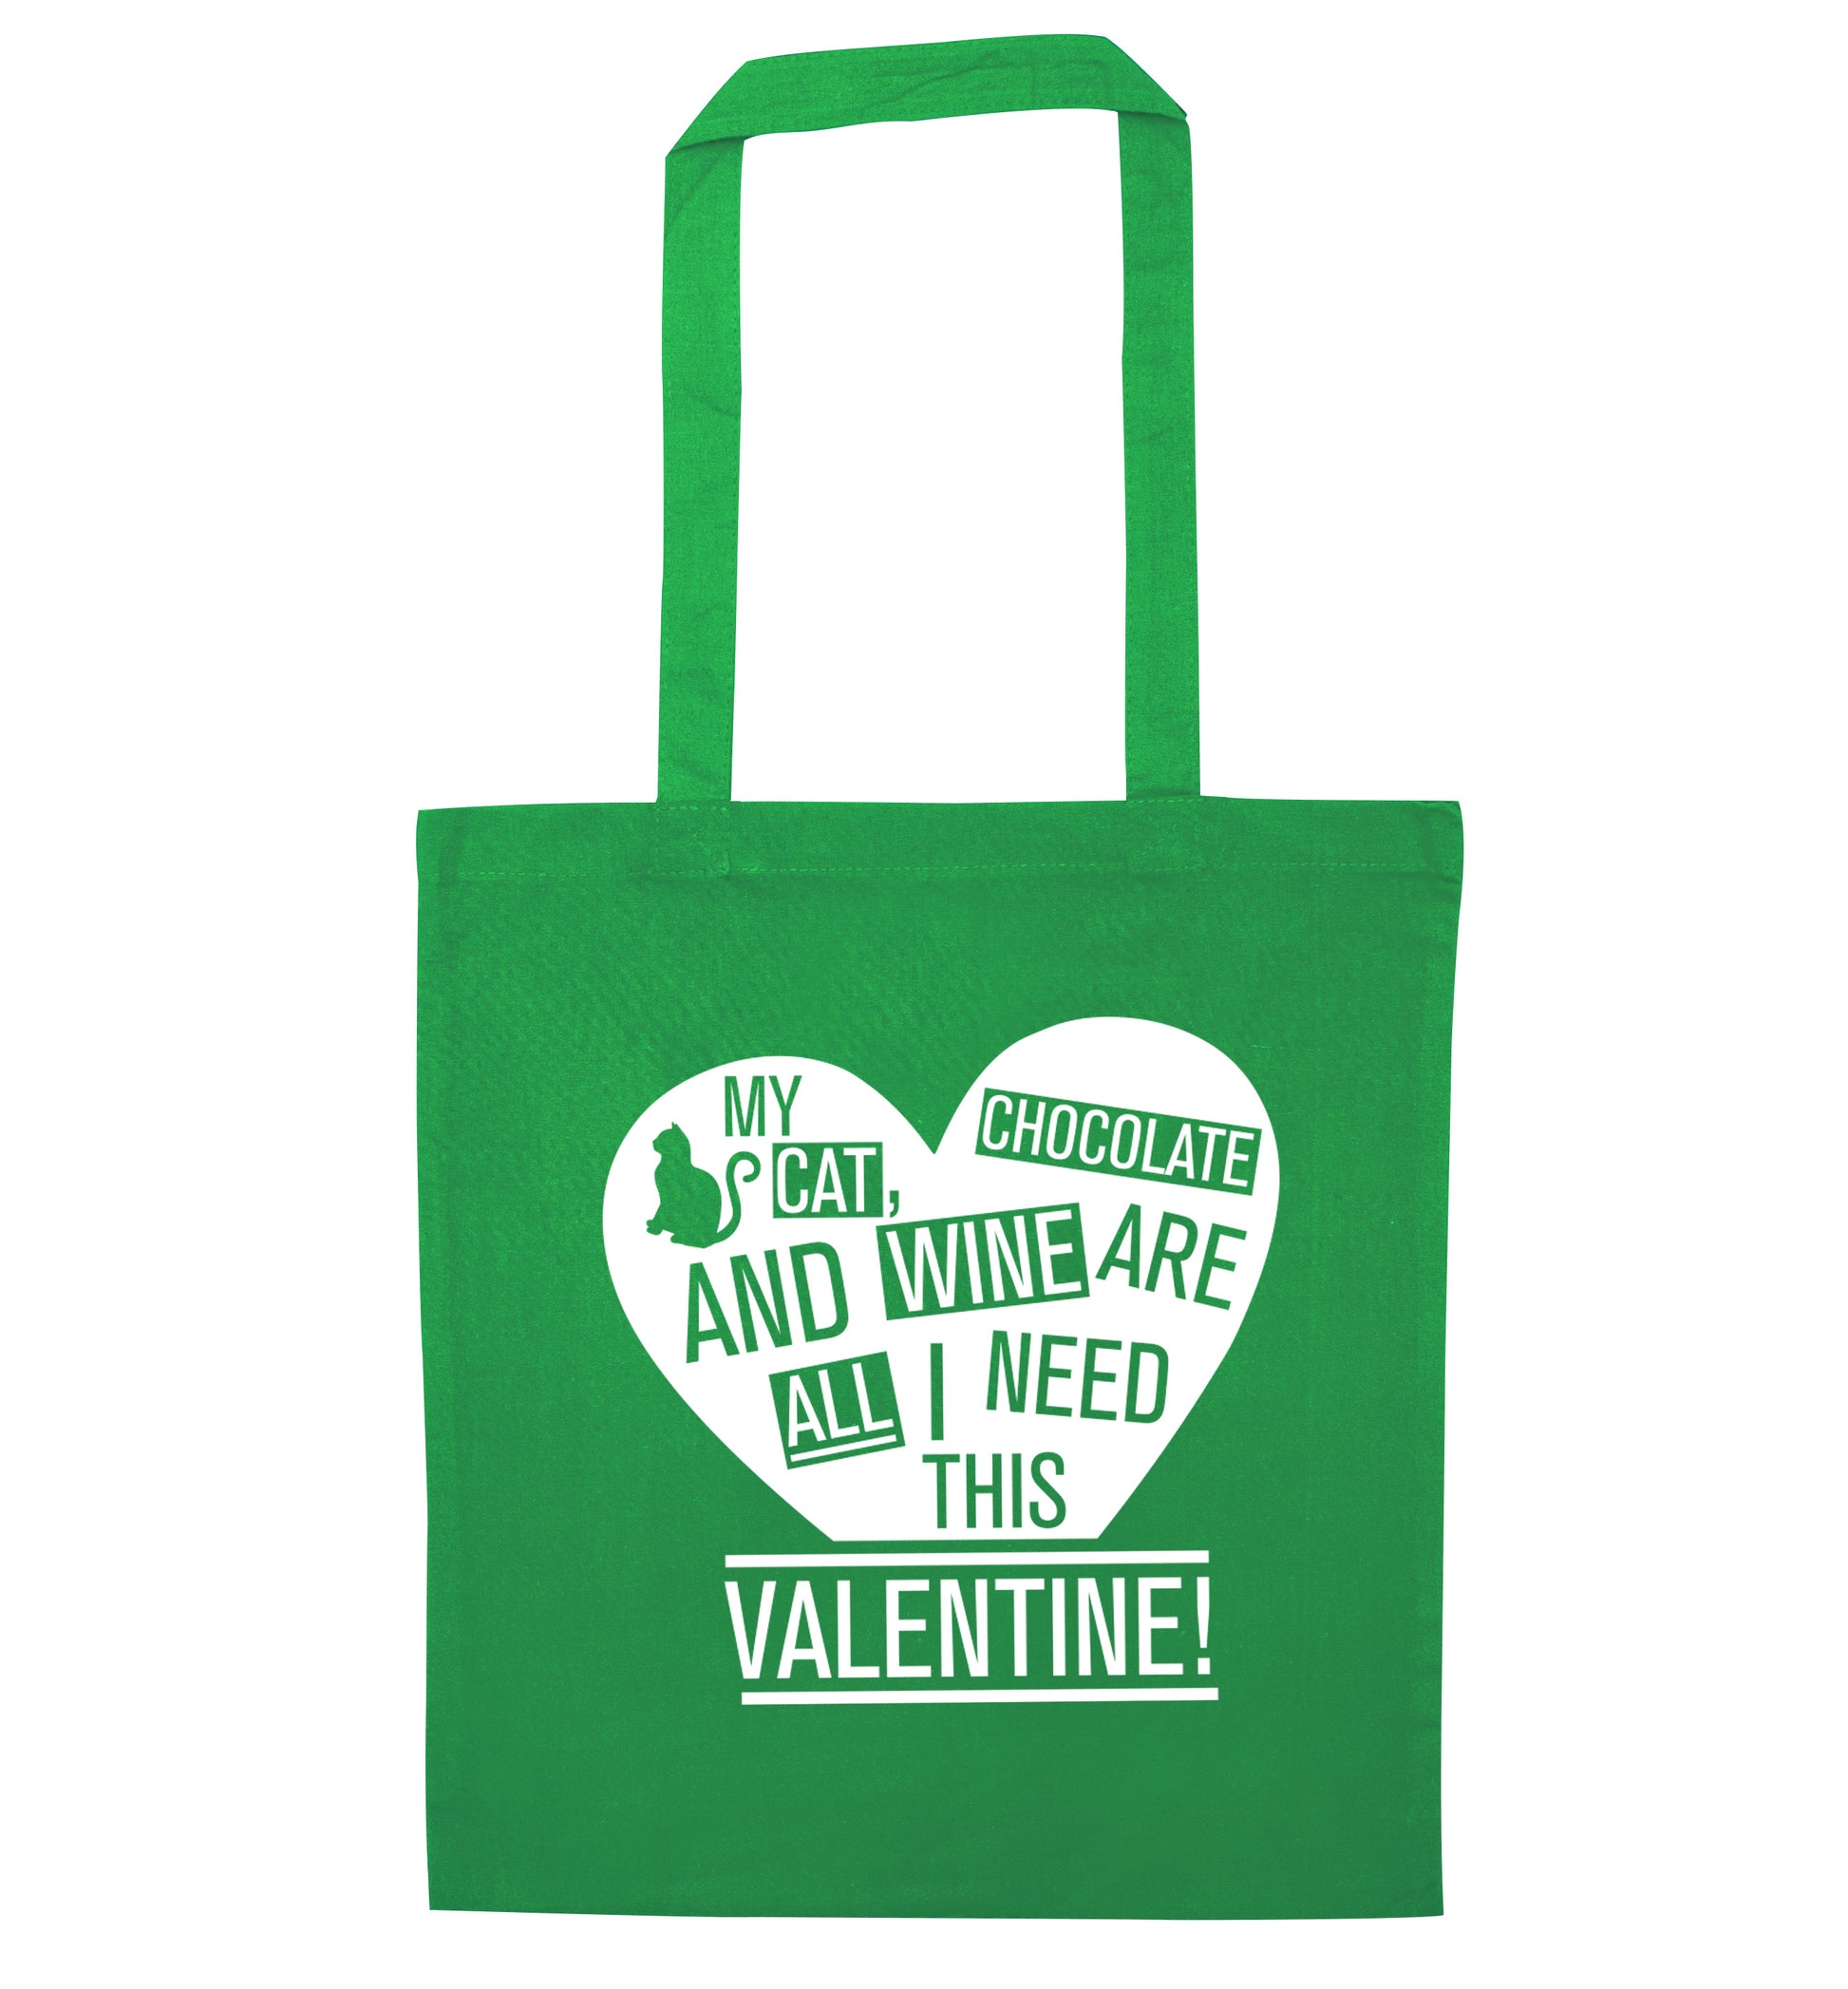 My cat, chocolate and wine are all I need this valentine! green tote bag